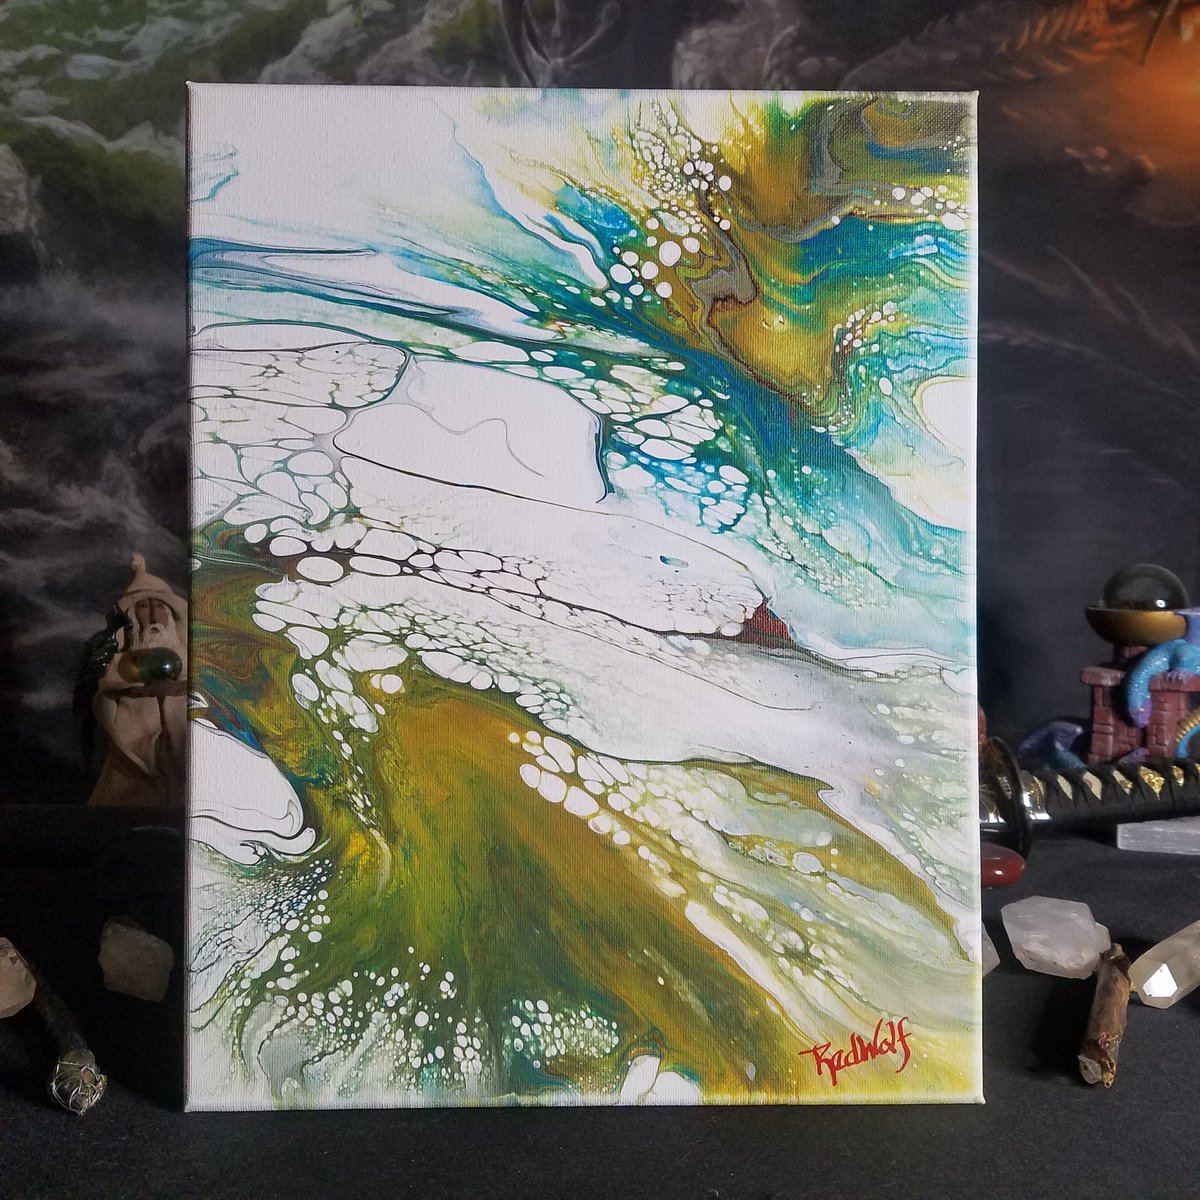 'Goose' Wet Paint Wednesday Completions 🎨

#paintpouring #art #fluidart #abstractart #wetpaintwednesday #abstract #abstractpainting #acrylicart #acrylicpainting